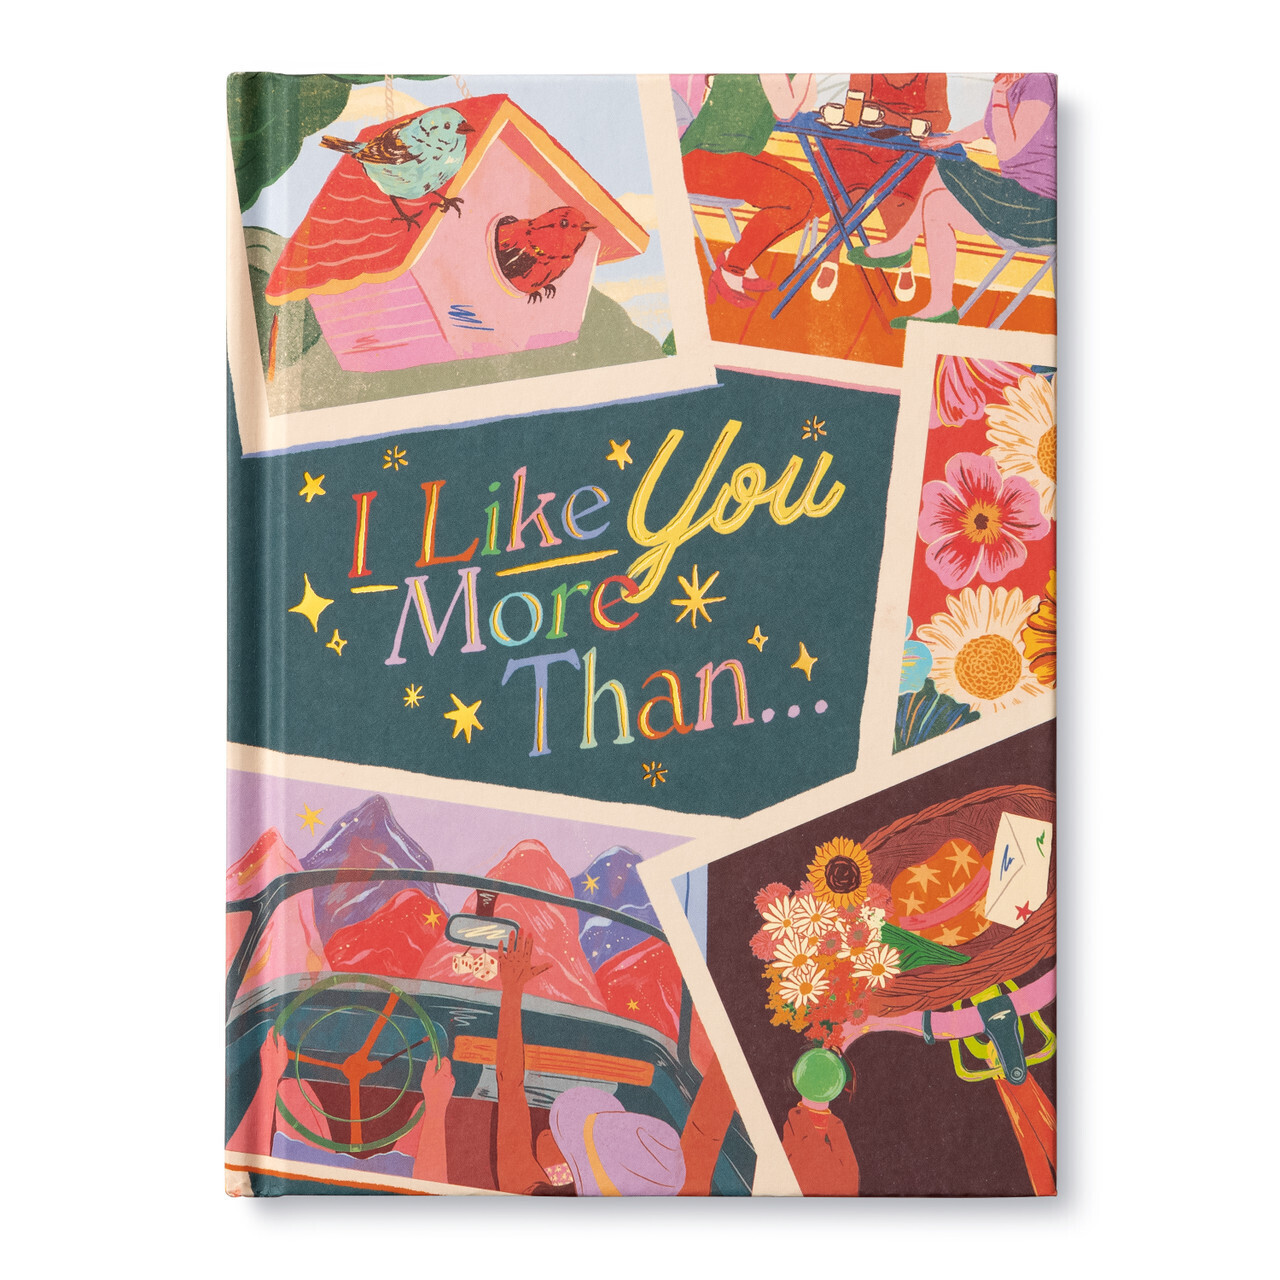 I Like You More Than... (A Gift Book to Celebrate Your Favorite Friend)